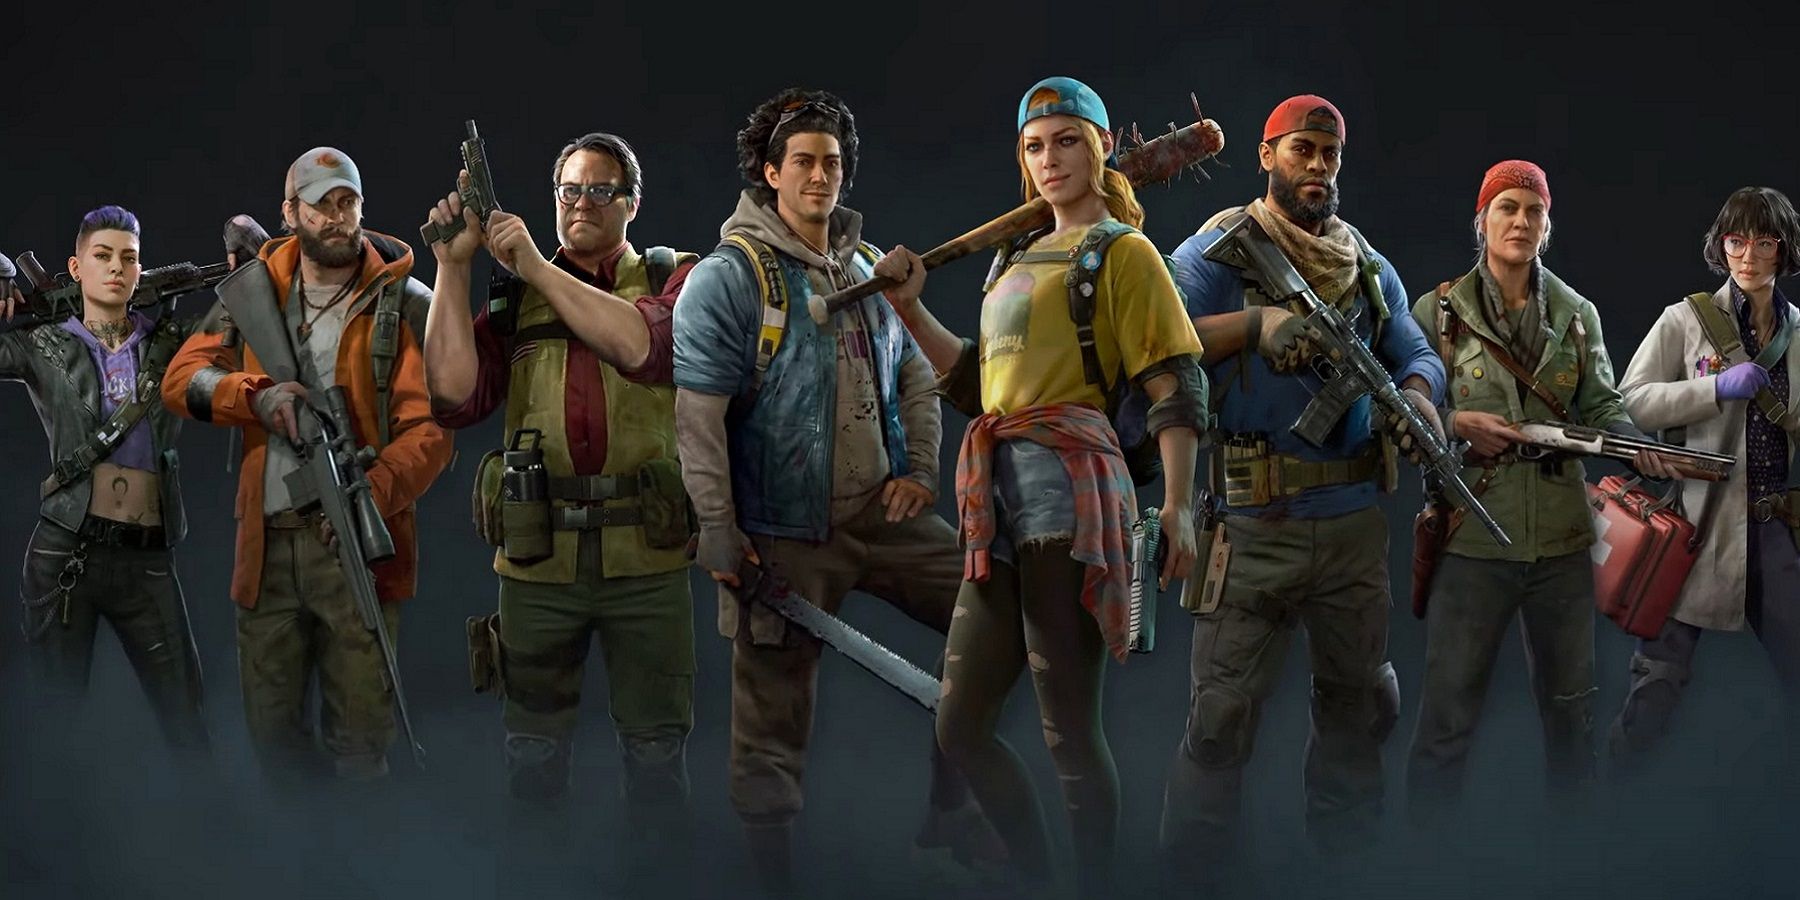 Image showing all the Back 4 Blood characters on a smoky background.